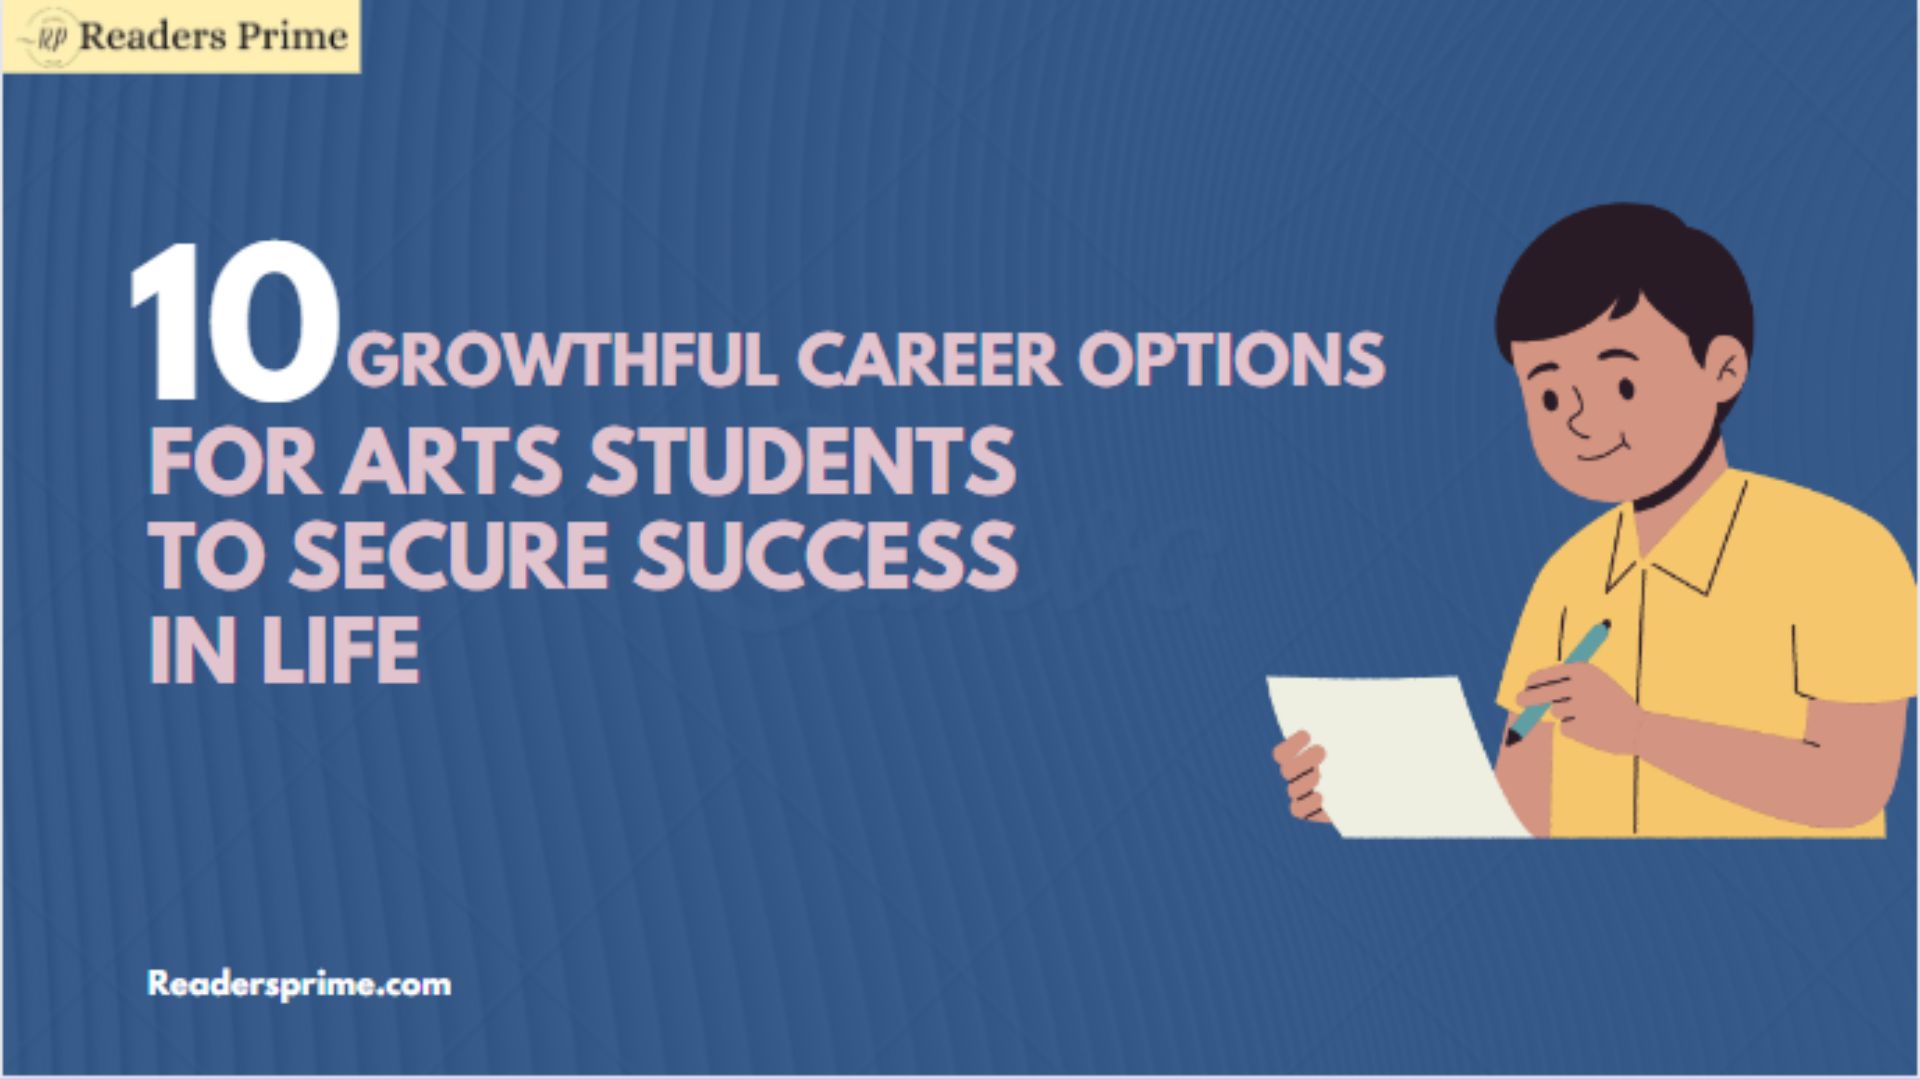 Growthful Career Options for Arts Students to Secure Success in Life